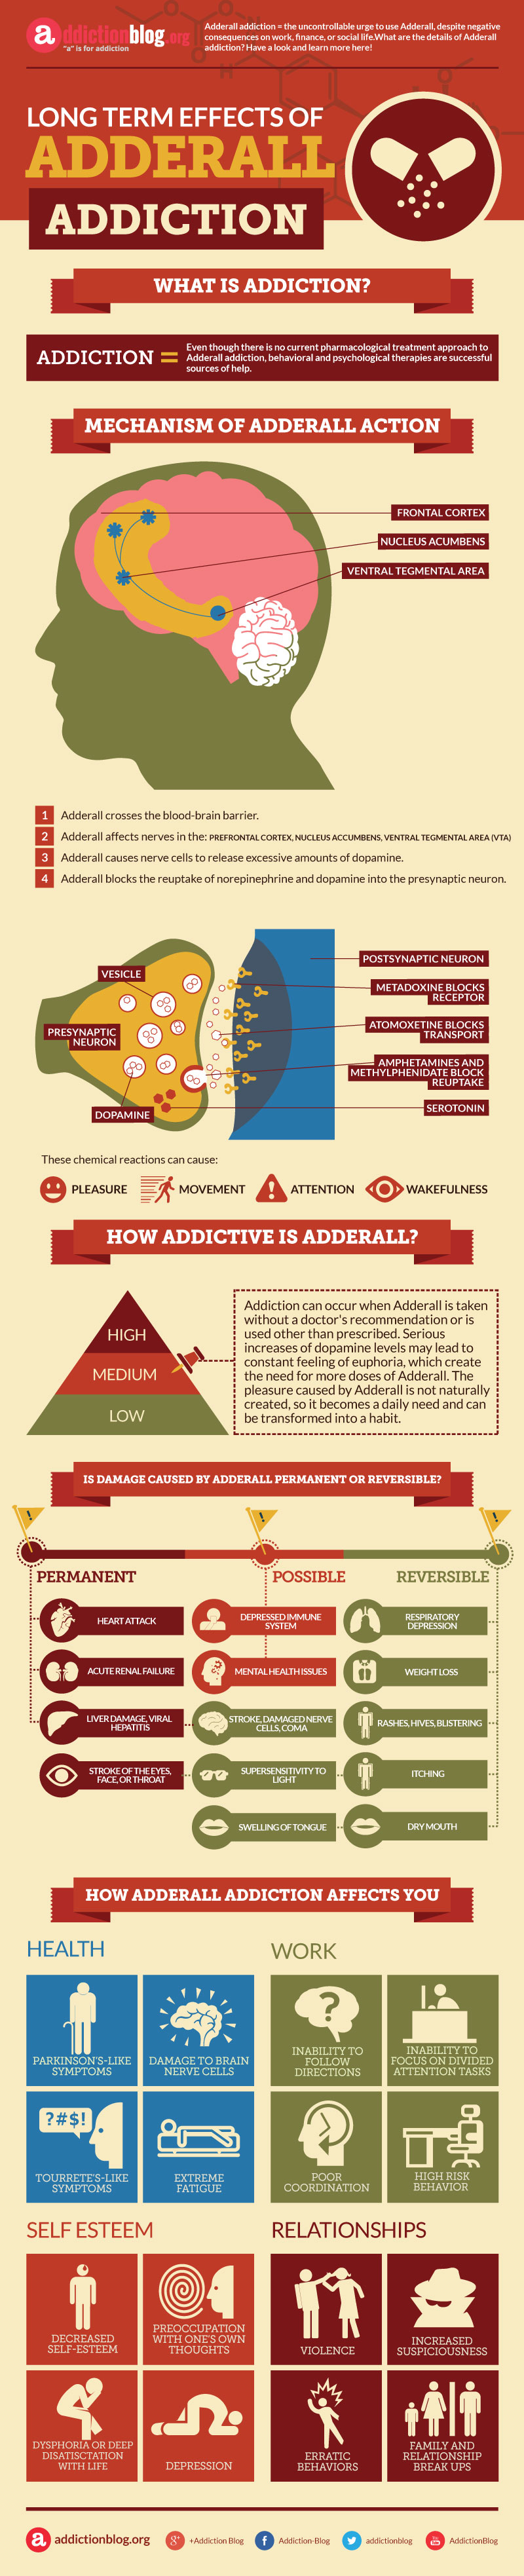 Long term effects of Adderall addiction (INFOGRAPHIC)